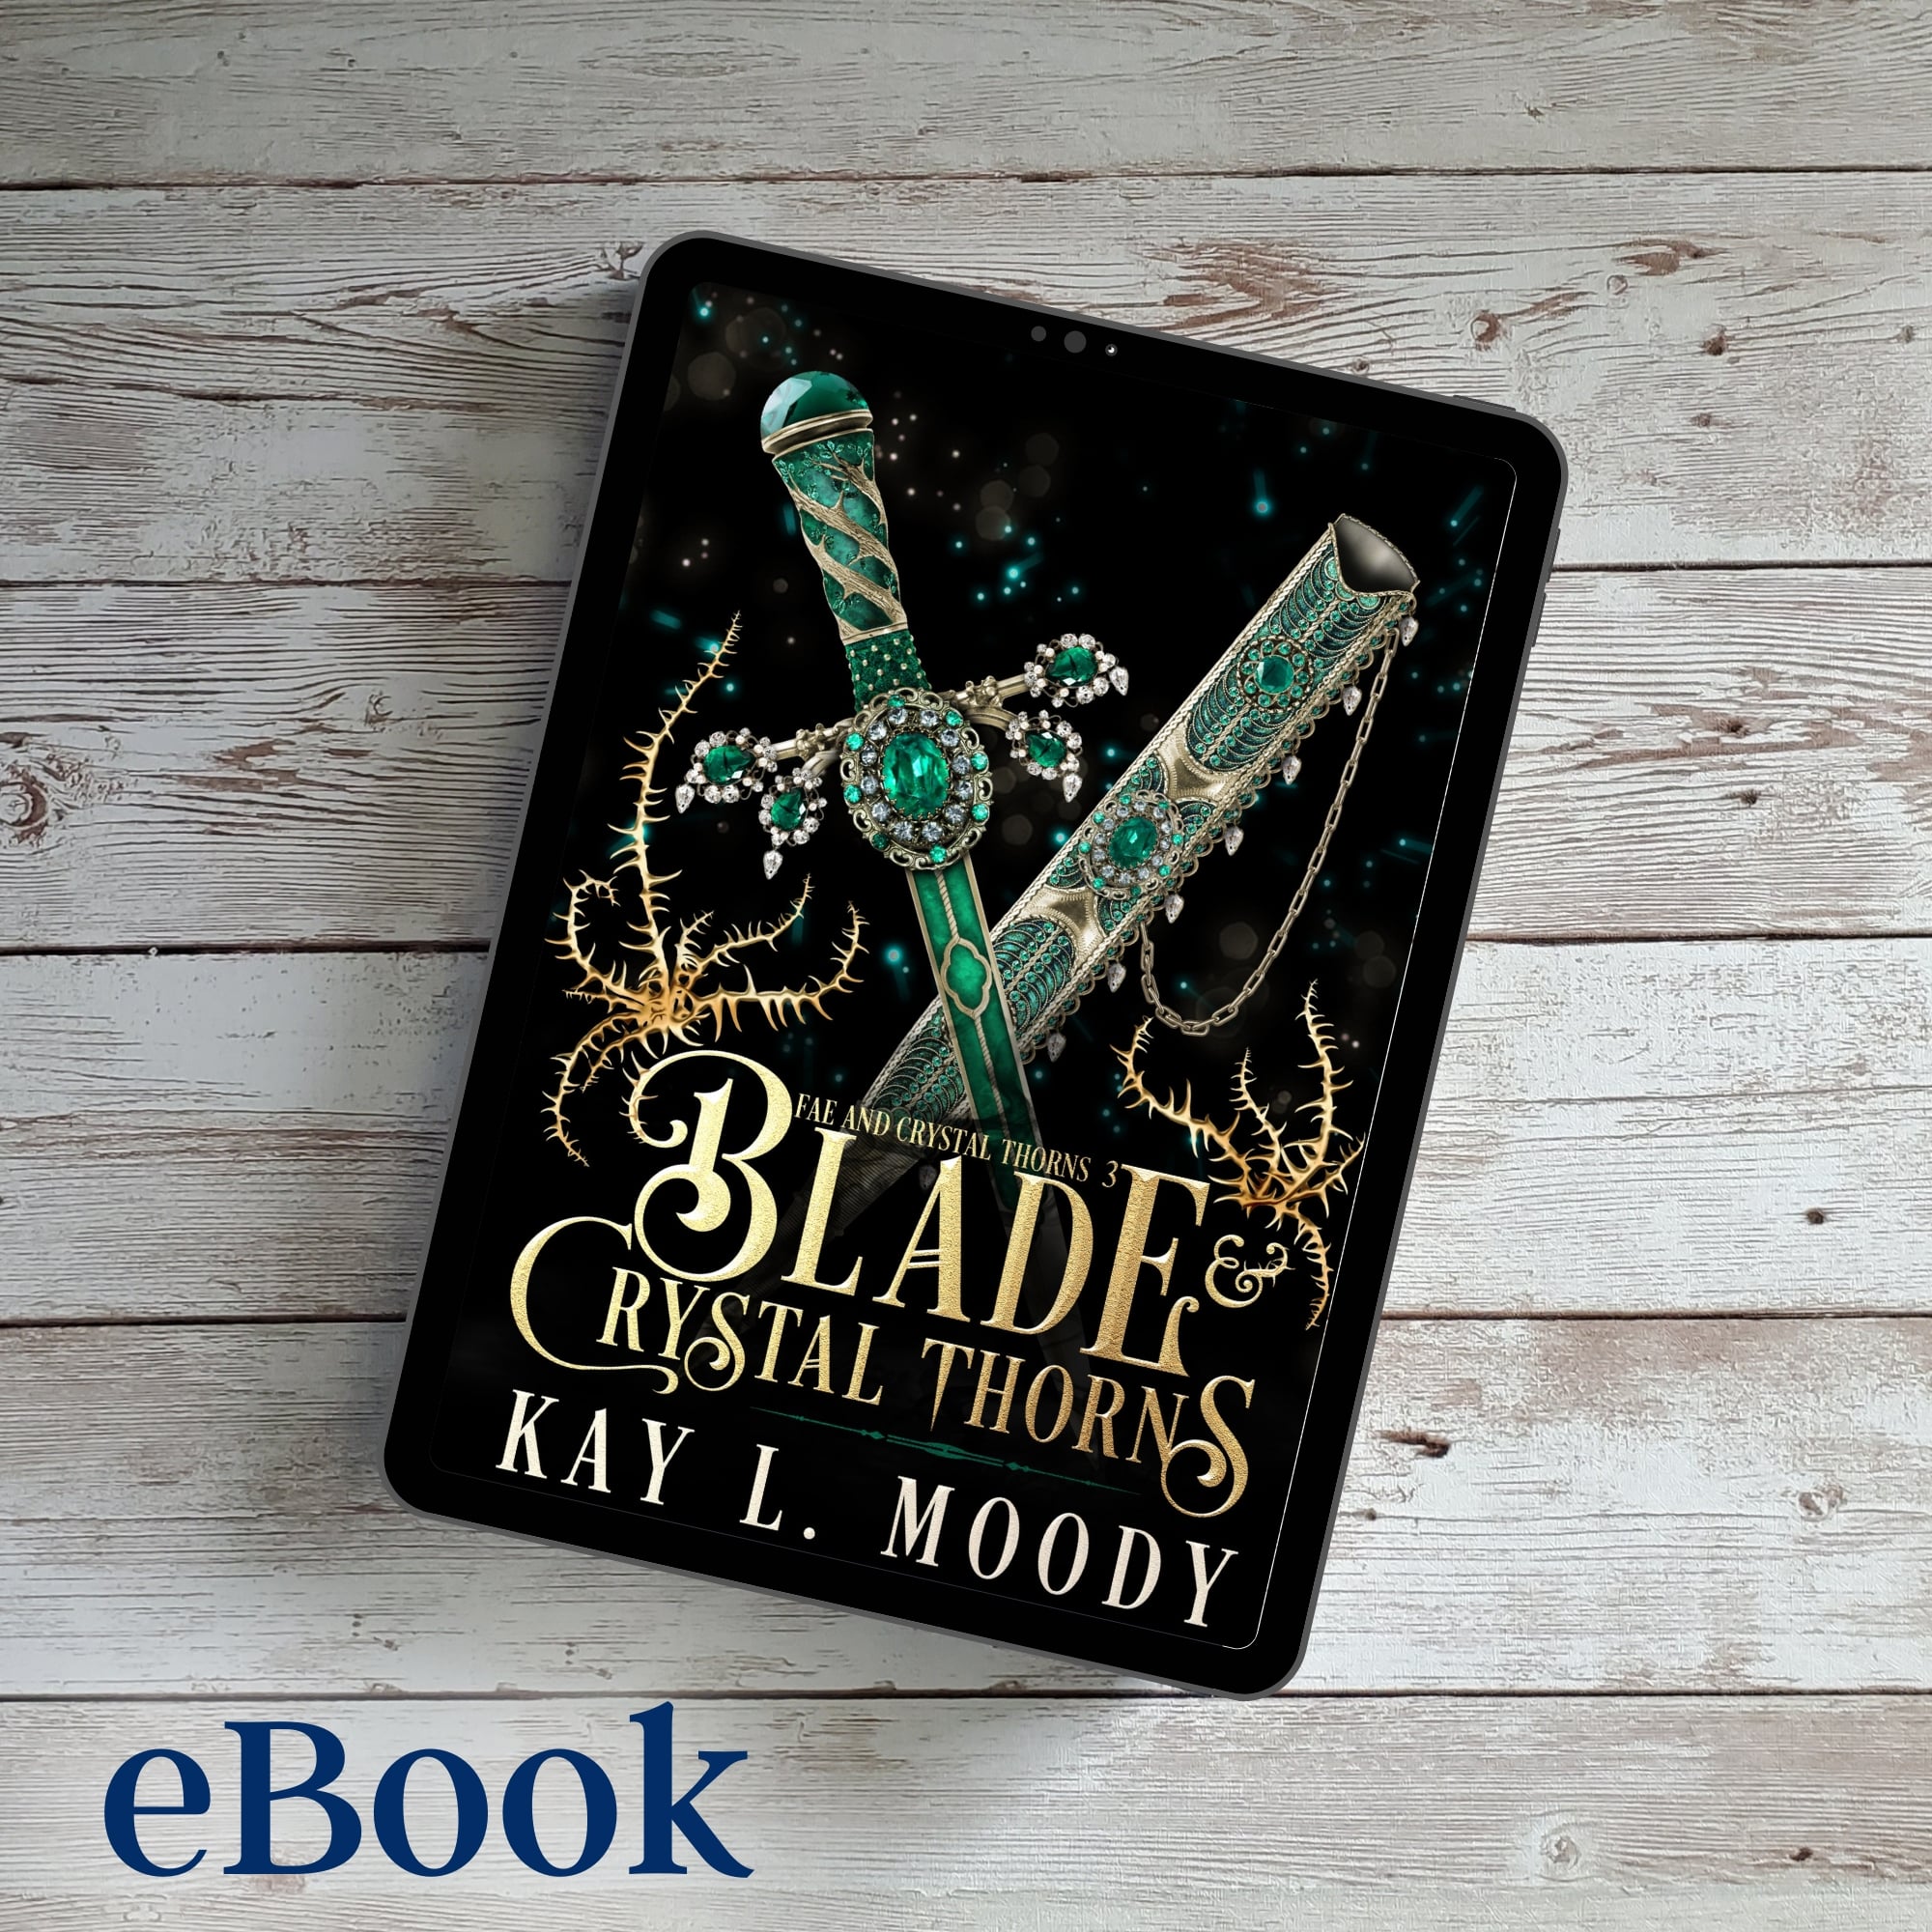 Blade and Crystal Thorns (Fae and Crystal Thorns, #3)